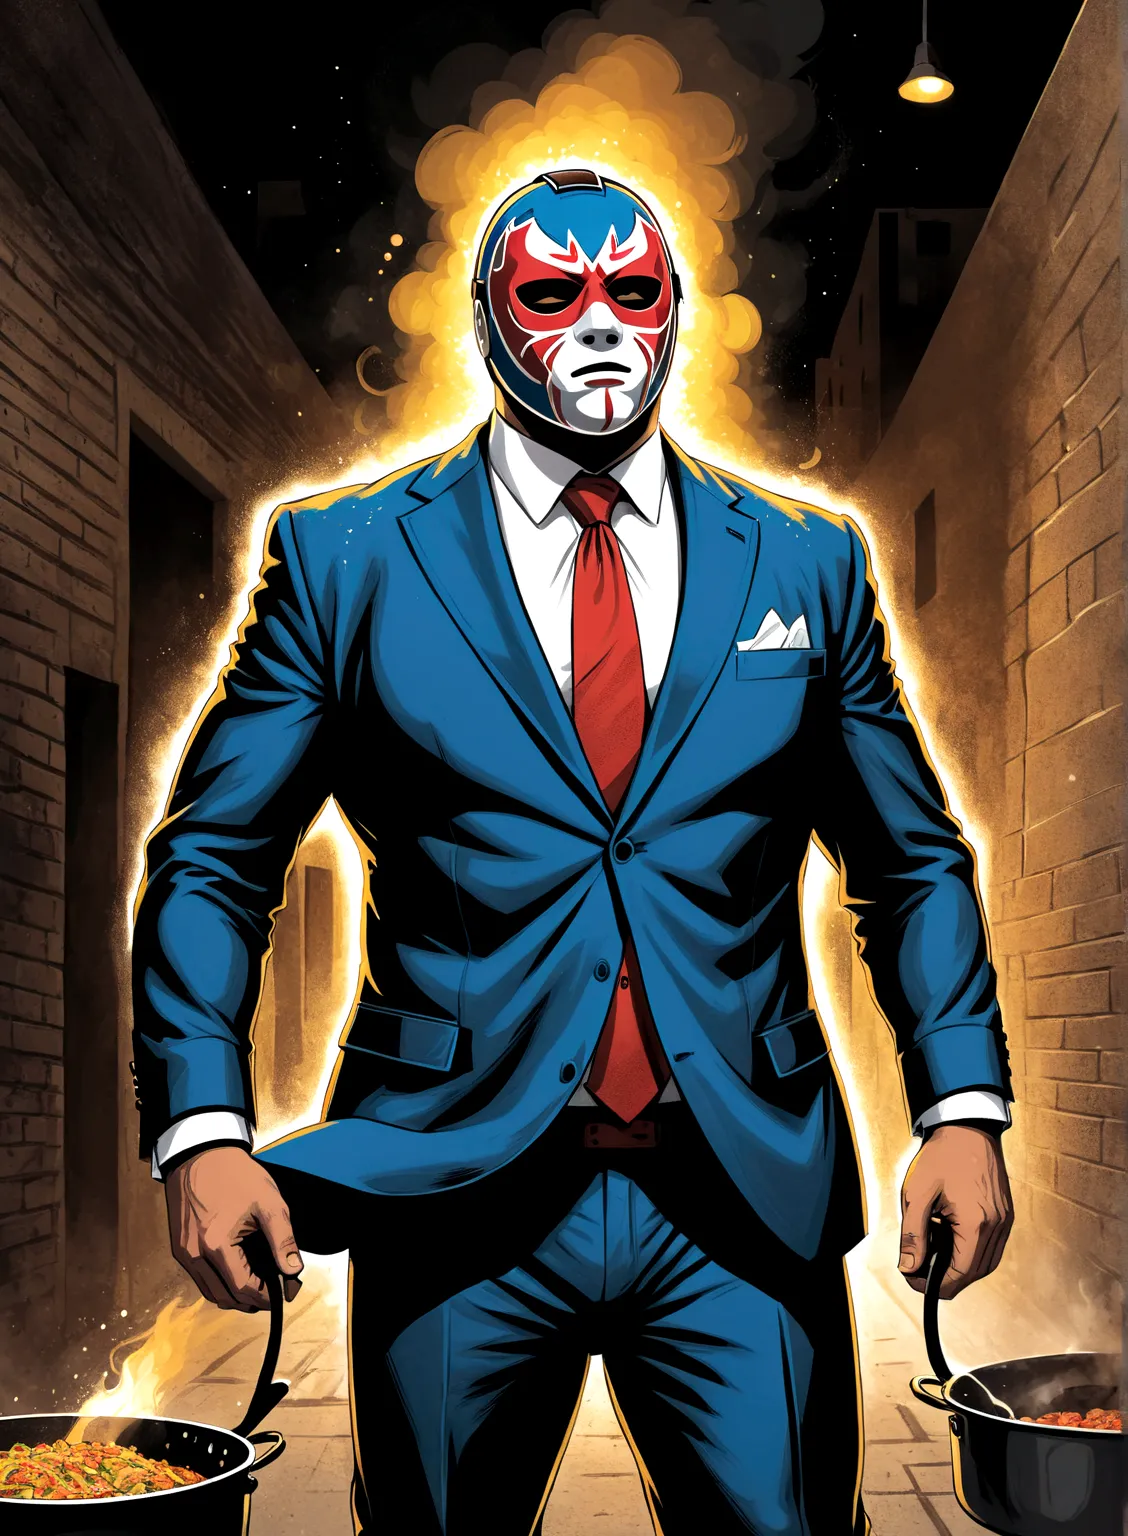 Minimalistic comic artwork of a large man in a business suit, wearing a wrestling mask, cooking in a dark alley, looking back at...